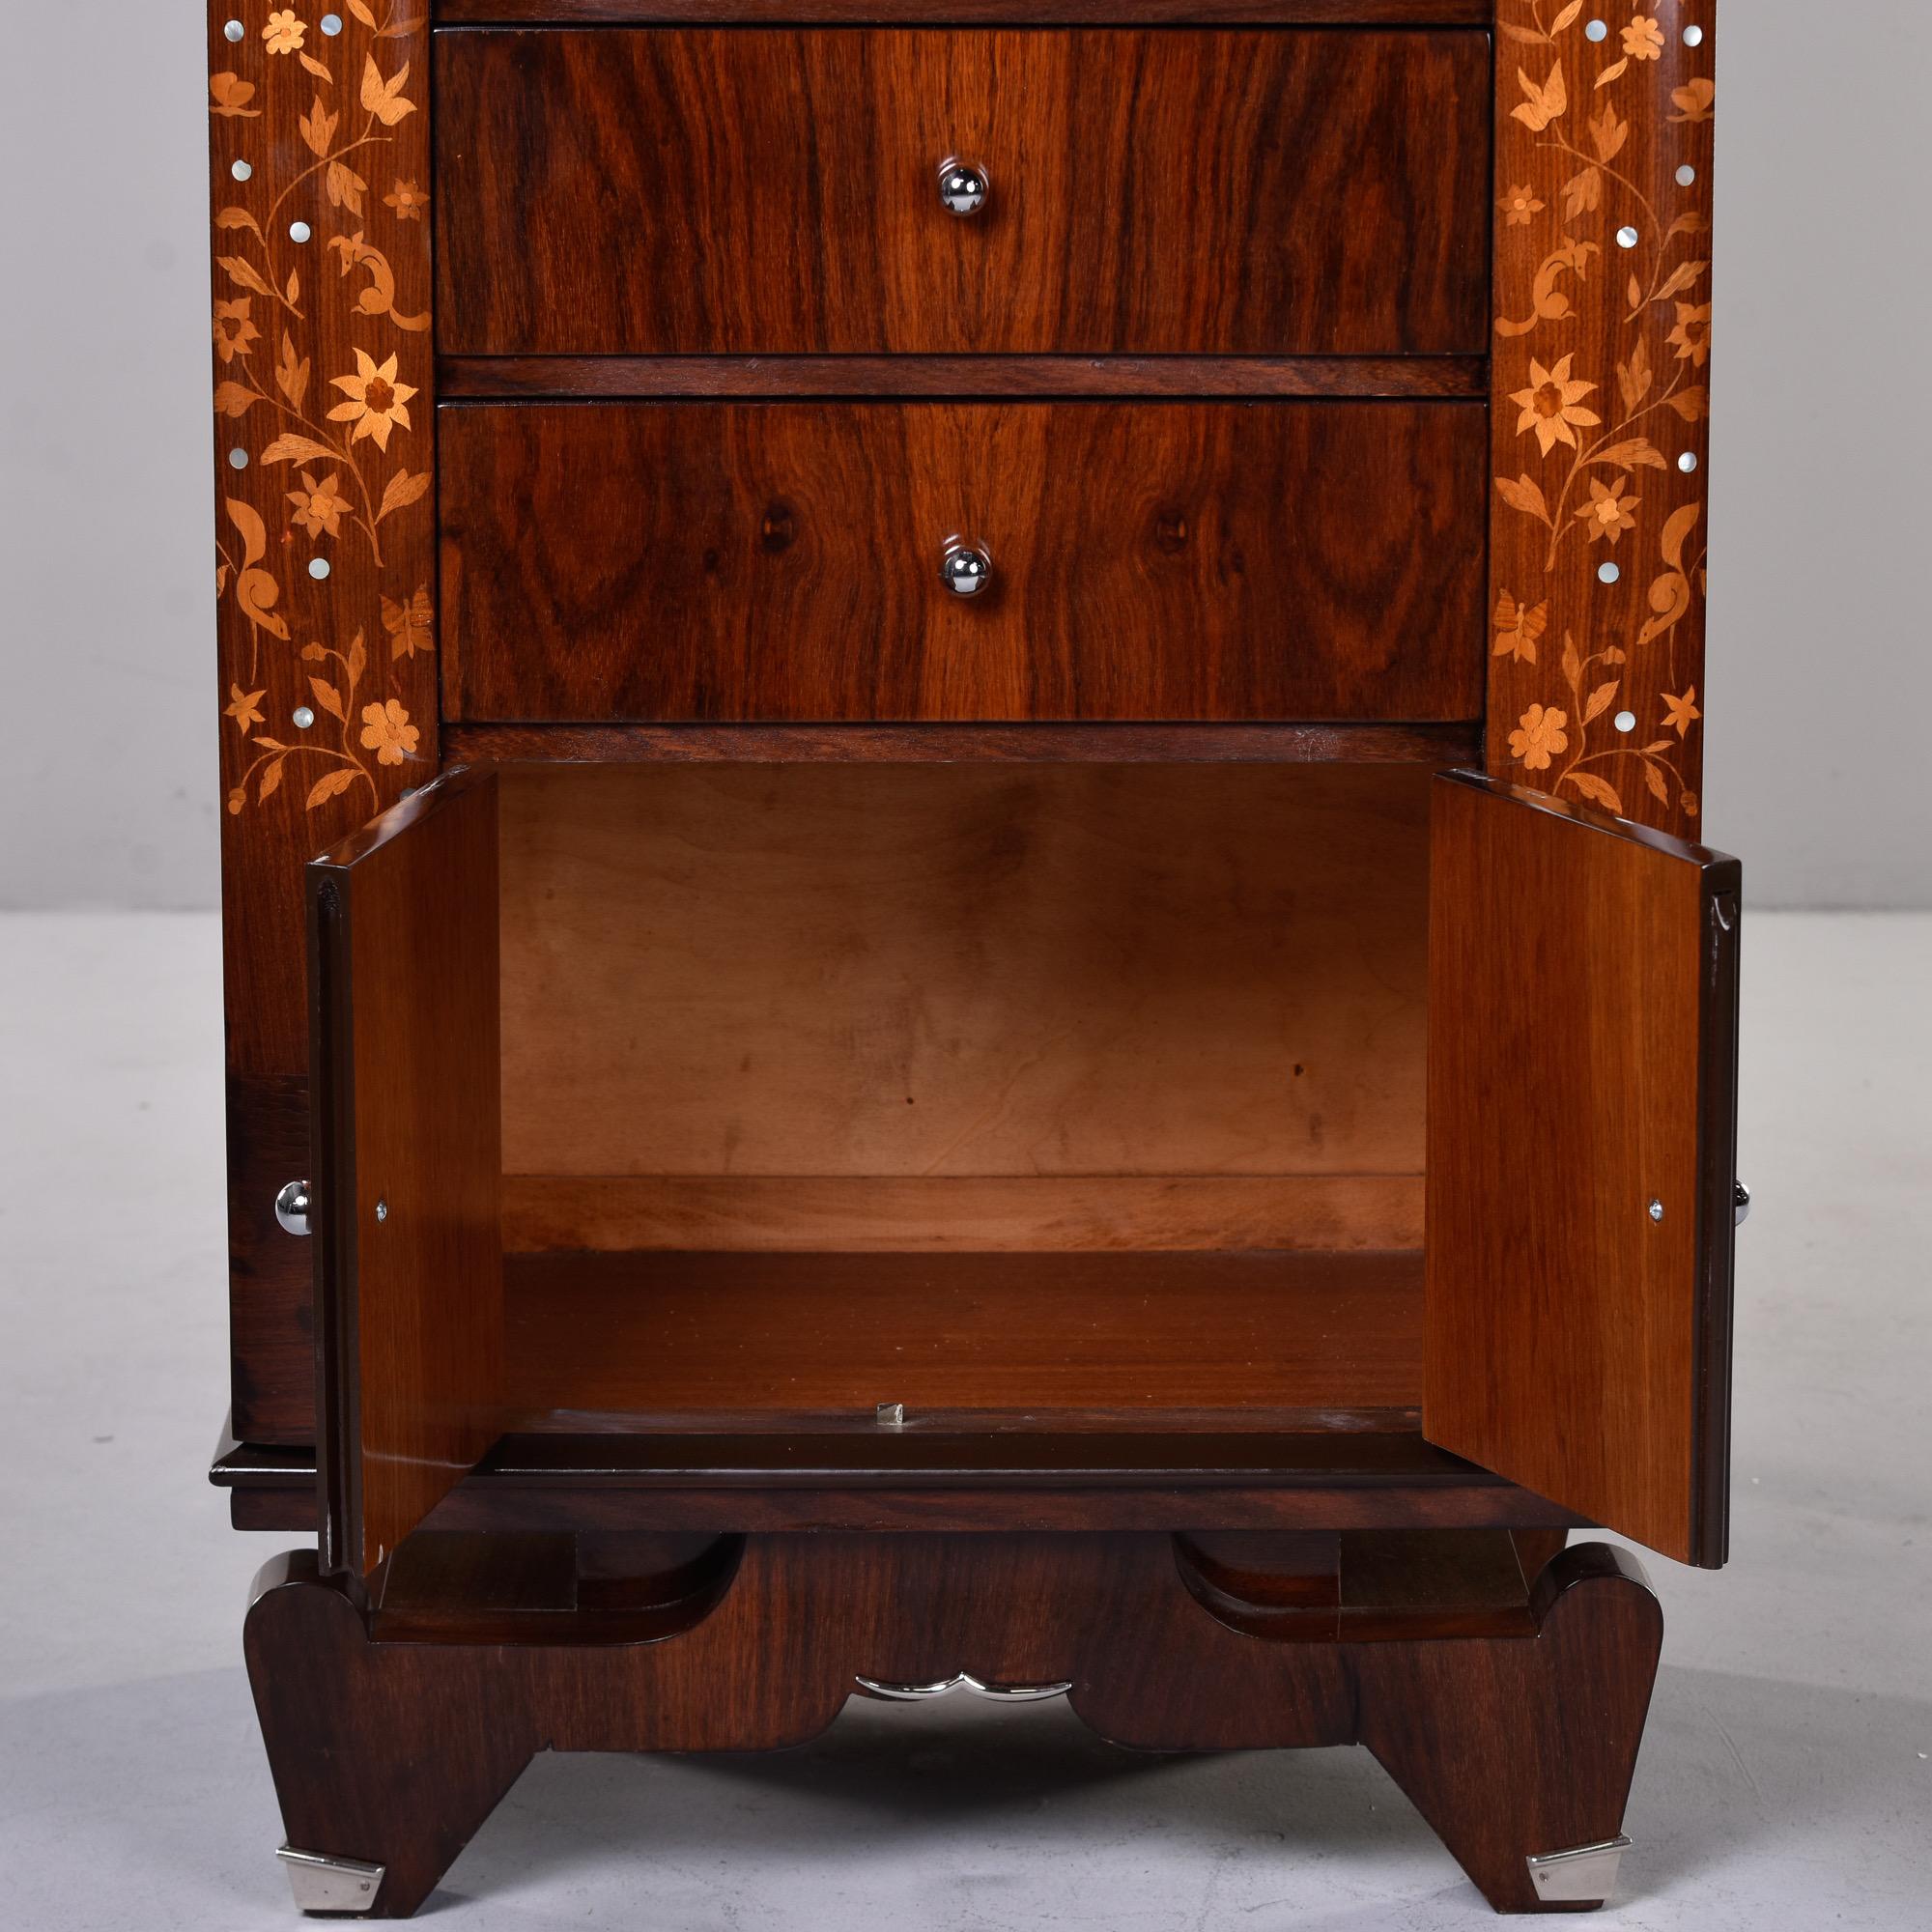 French Art Deco Palisandre Tall Cabinet with Mother of Pearl Inlay In Good Condition For Sale In Troy, MI